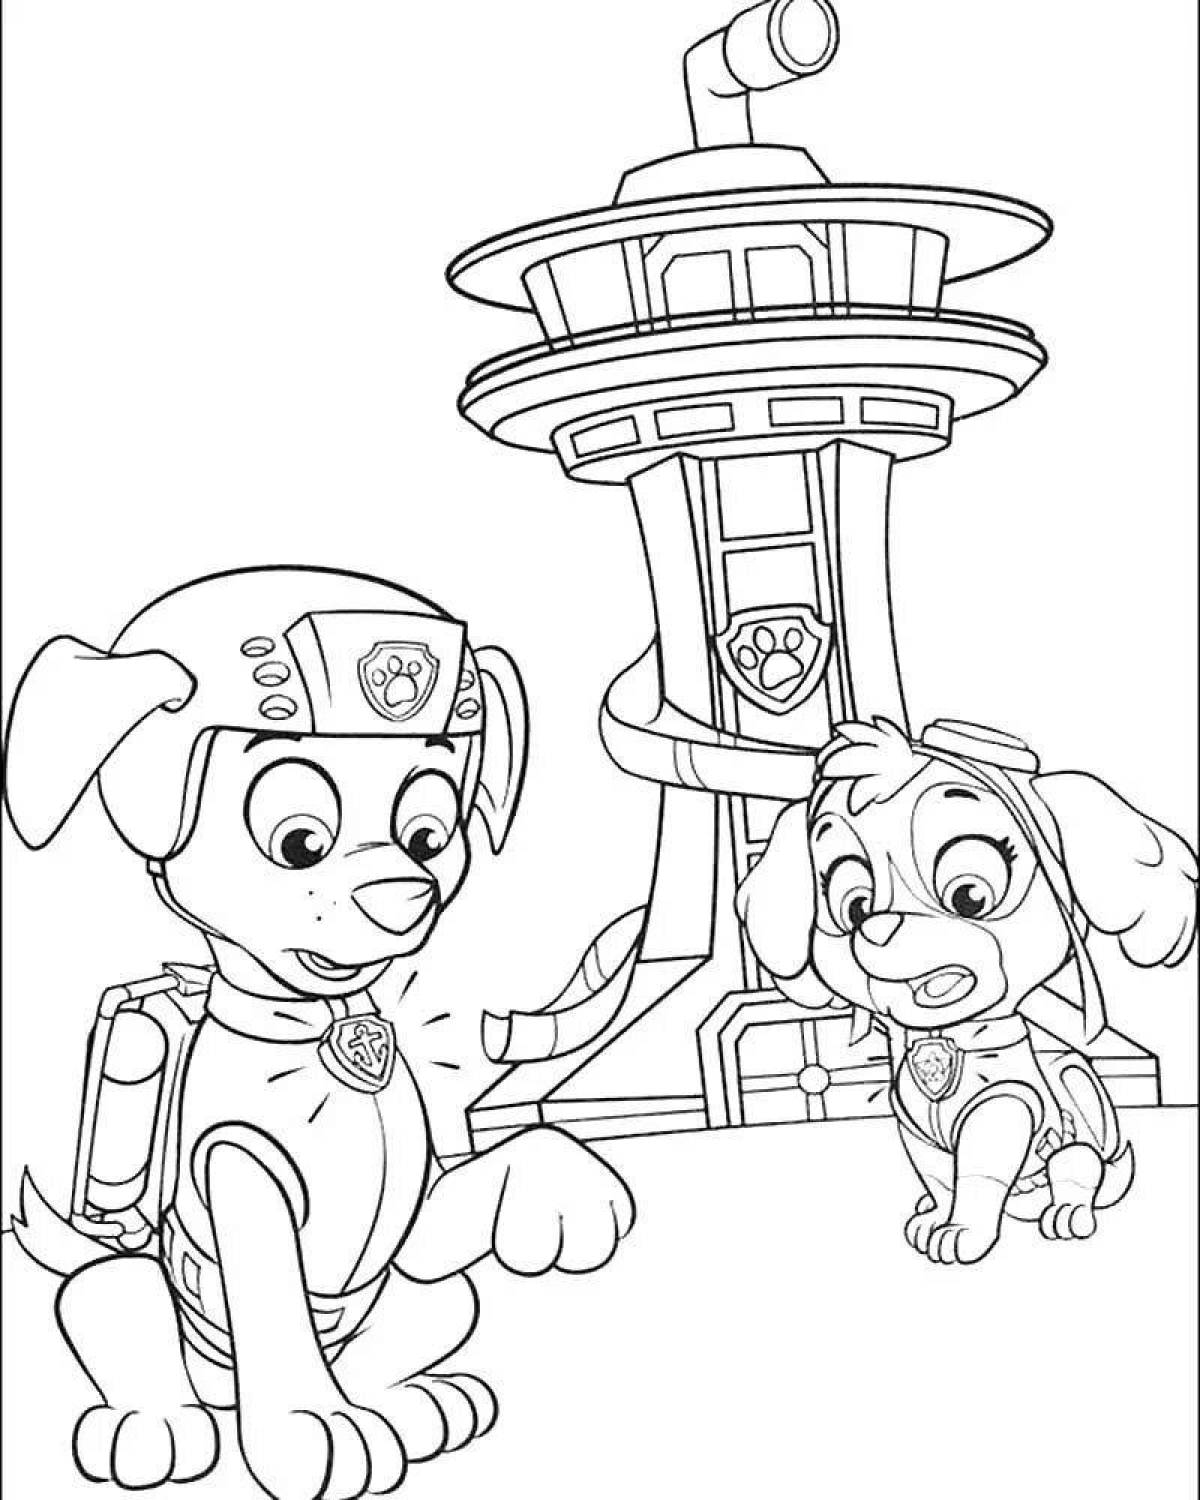 Serene sky coloring page for 3-4 year olds